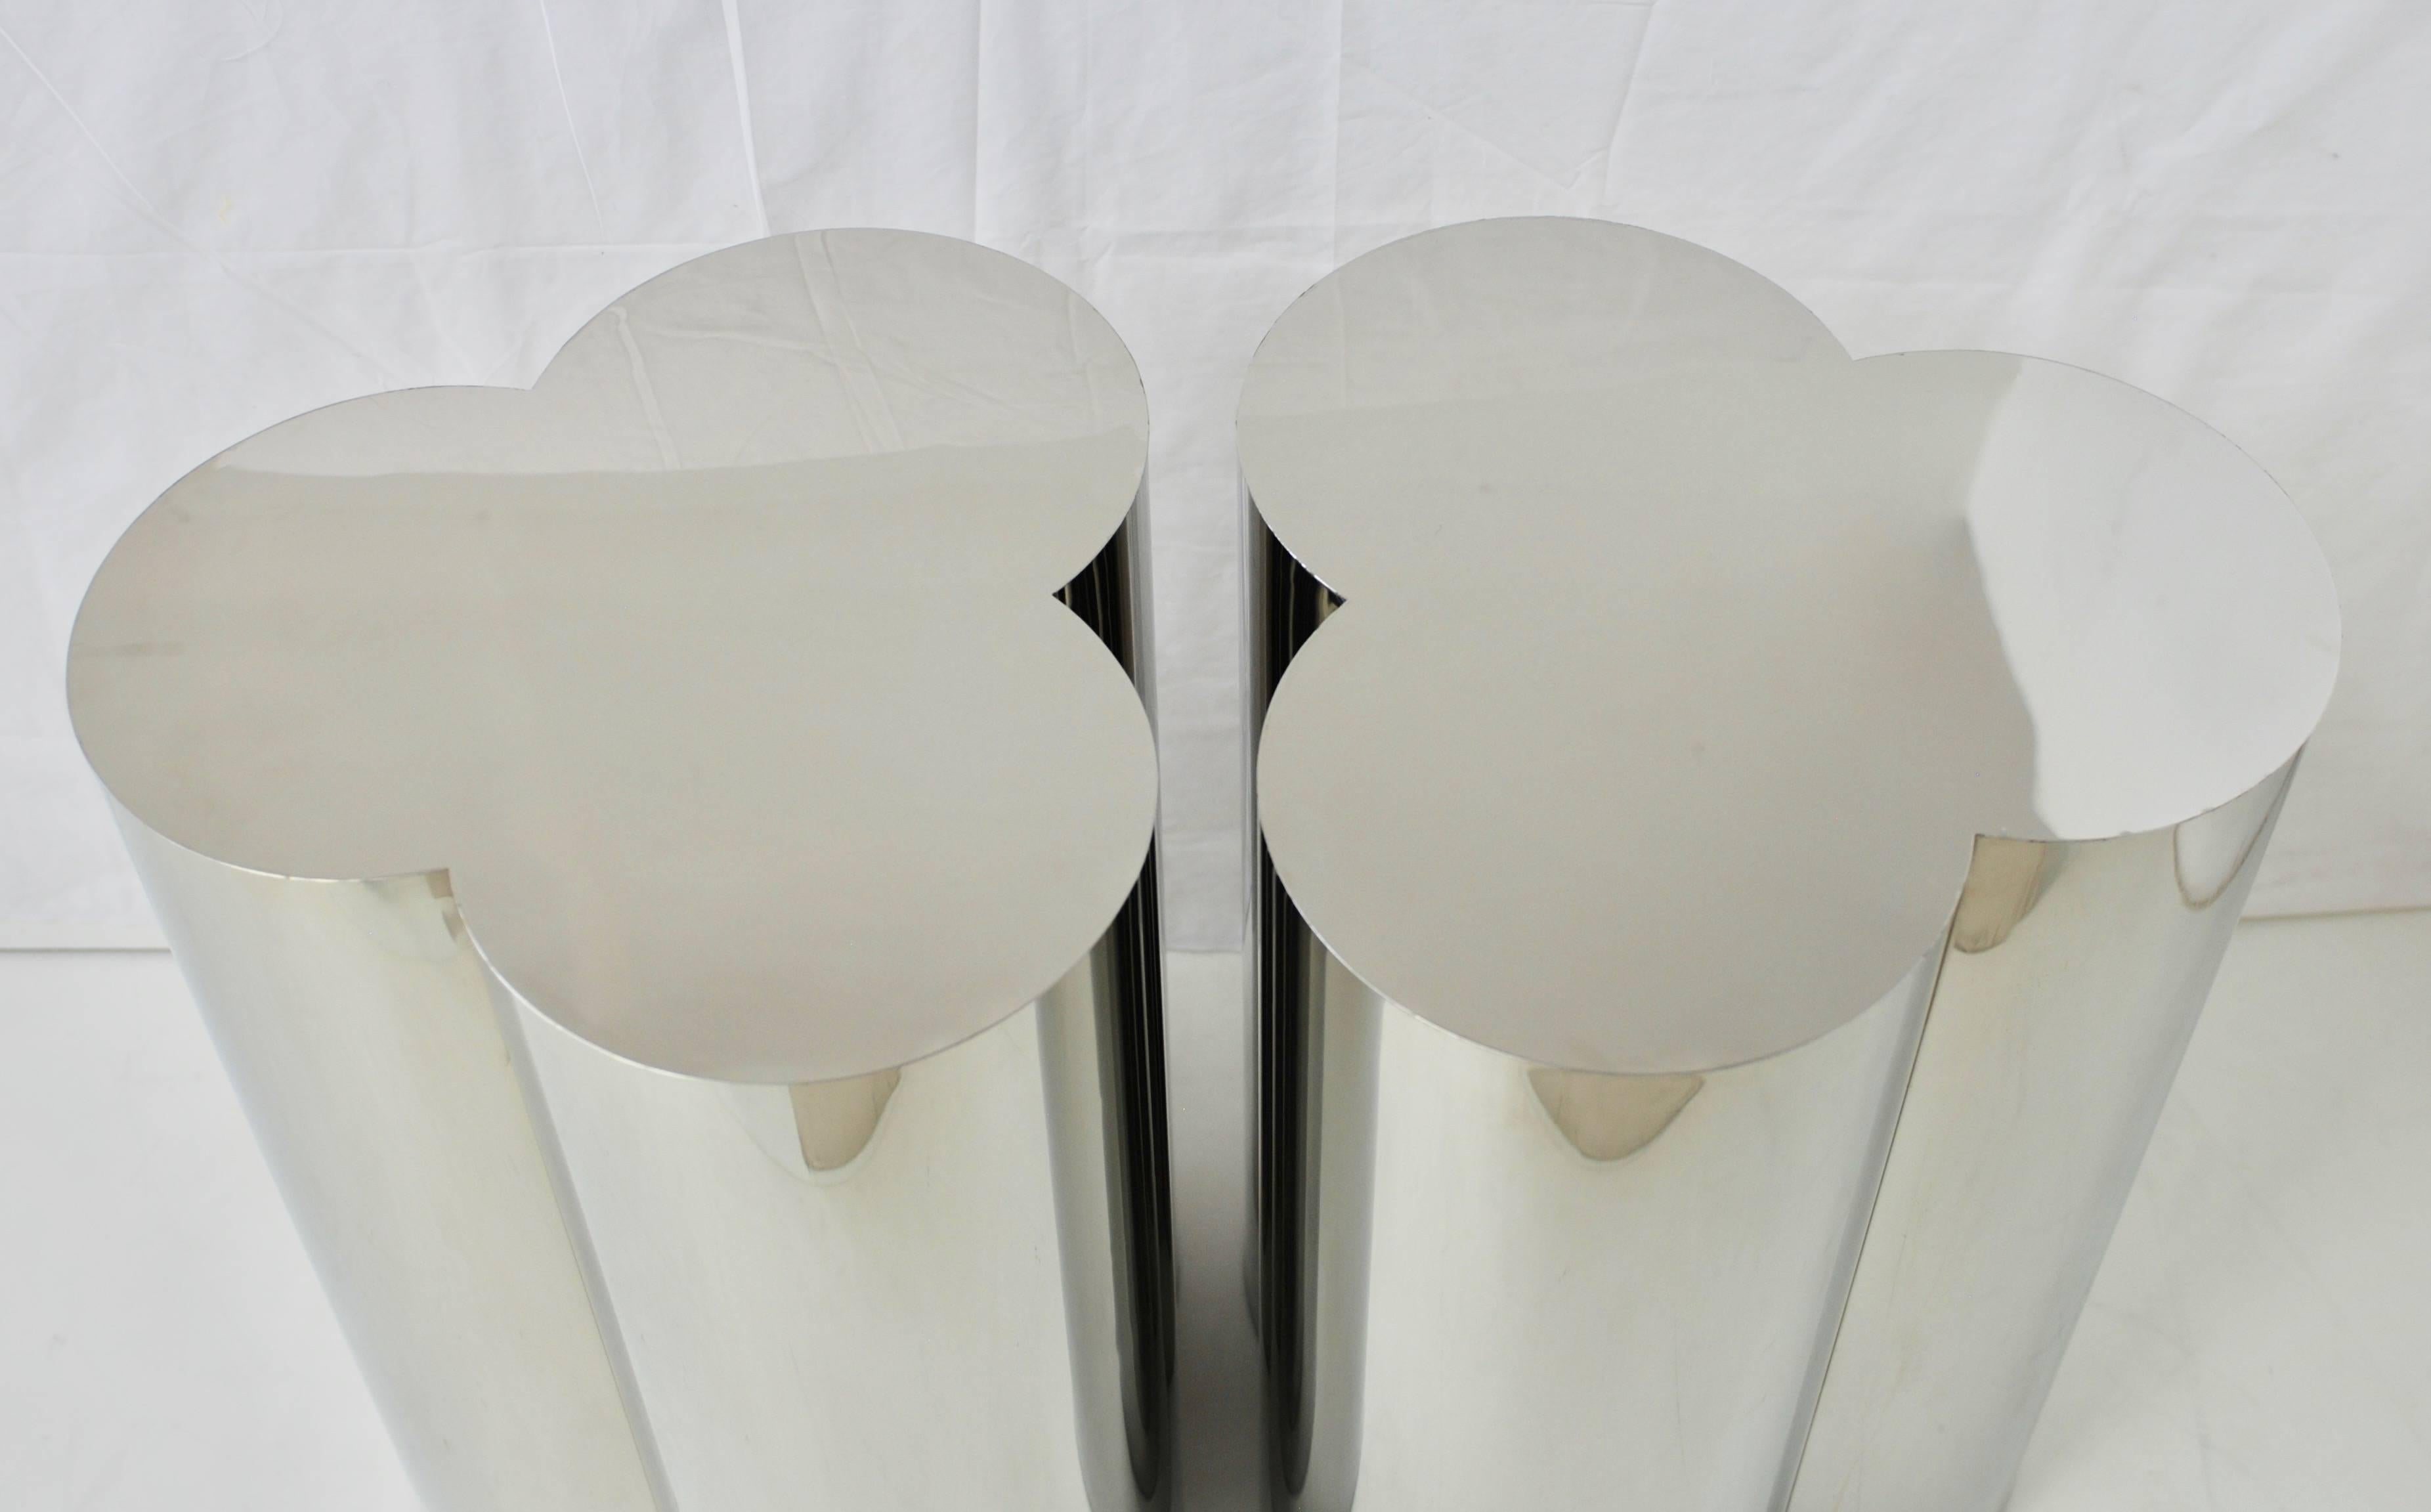 20th Century Pair of Chrome Finish Clover Pedestal Table Bases Attributed to C. Jere